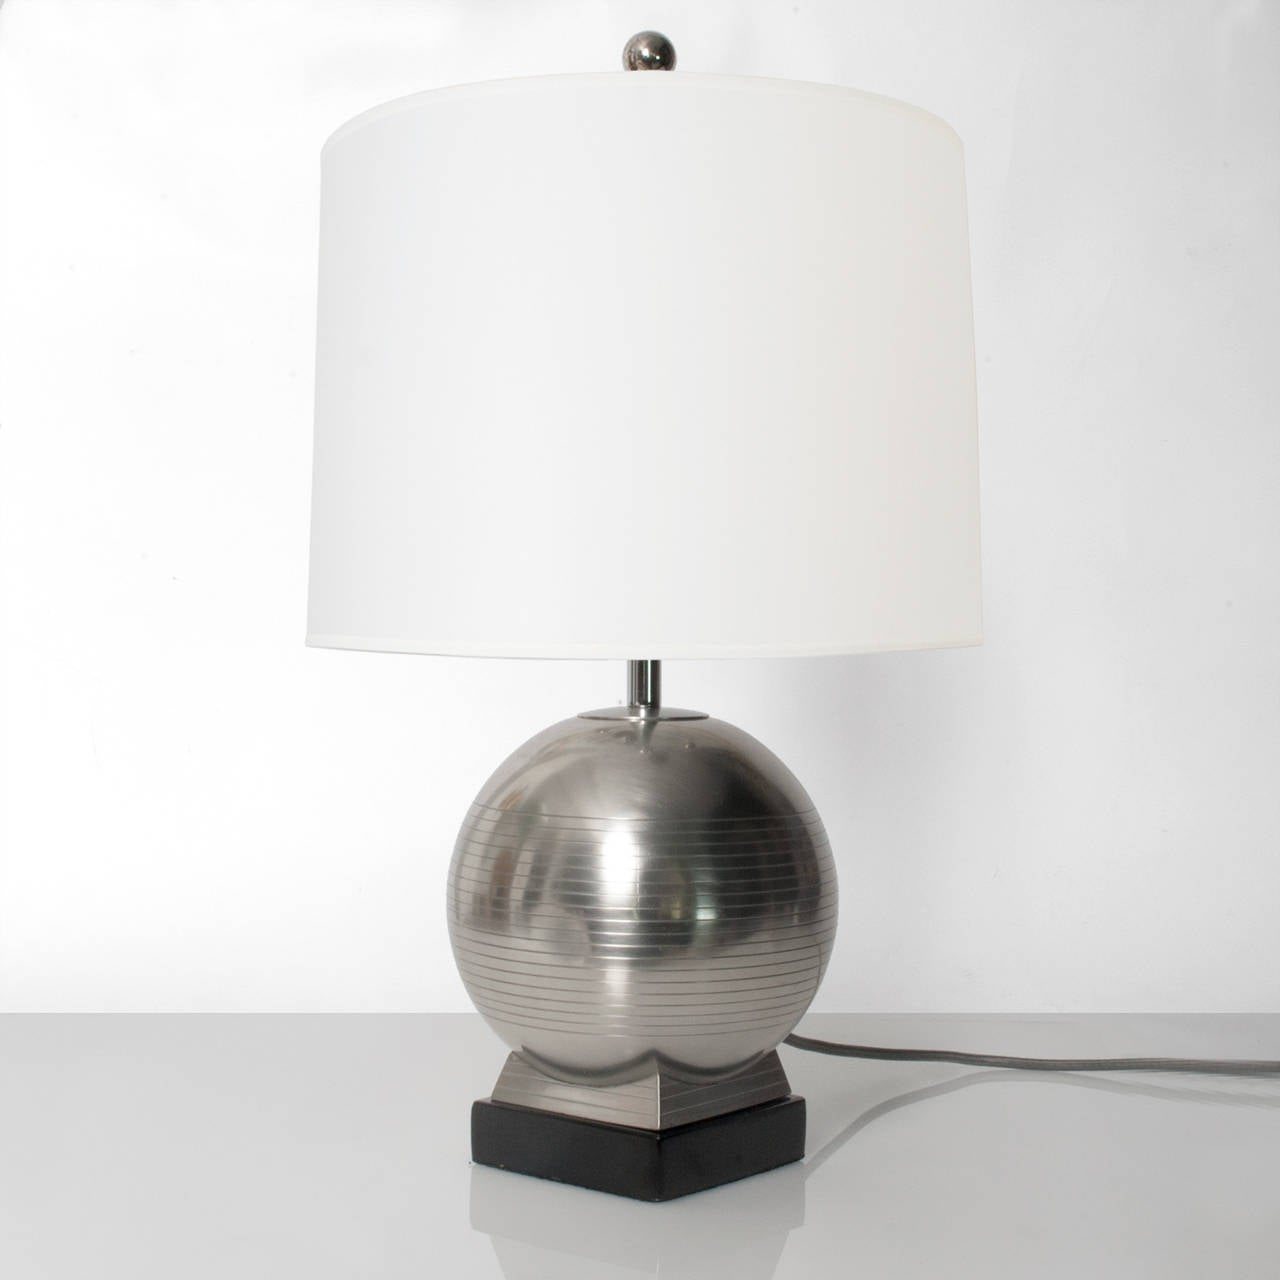 Polished Swedish Art Deco Pewter Table Lamp on Lacquered Wood Plinth by G.A.B.